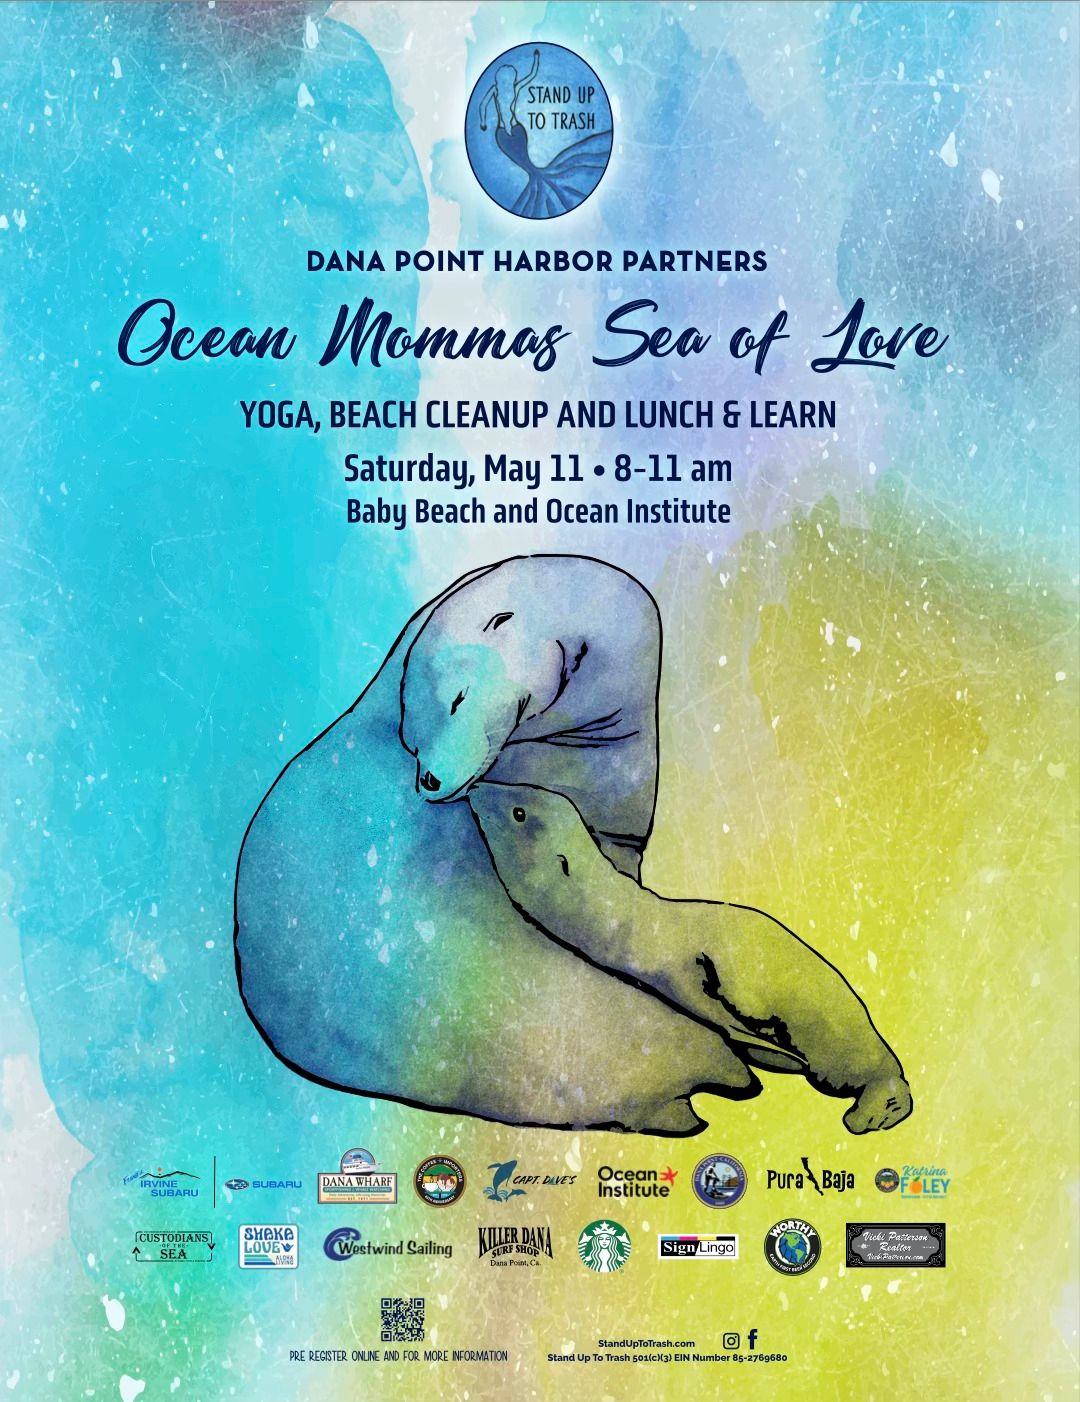 Ocean Mamas Sea of Love Yoga, Beach Cleanup and Lunch & Learn